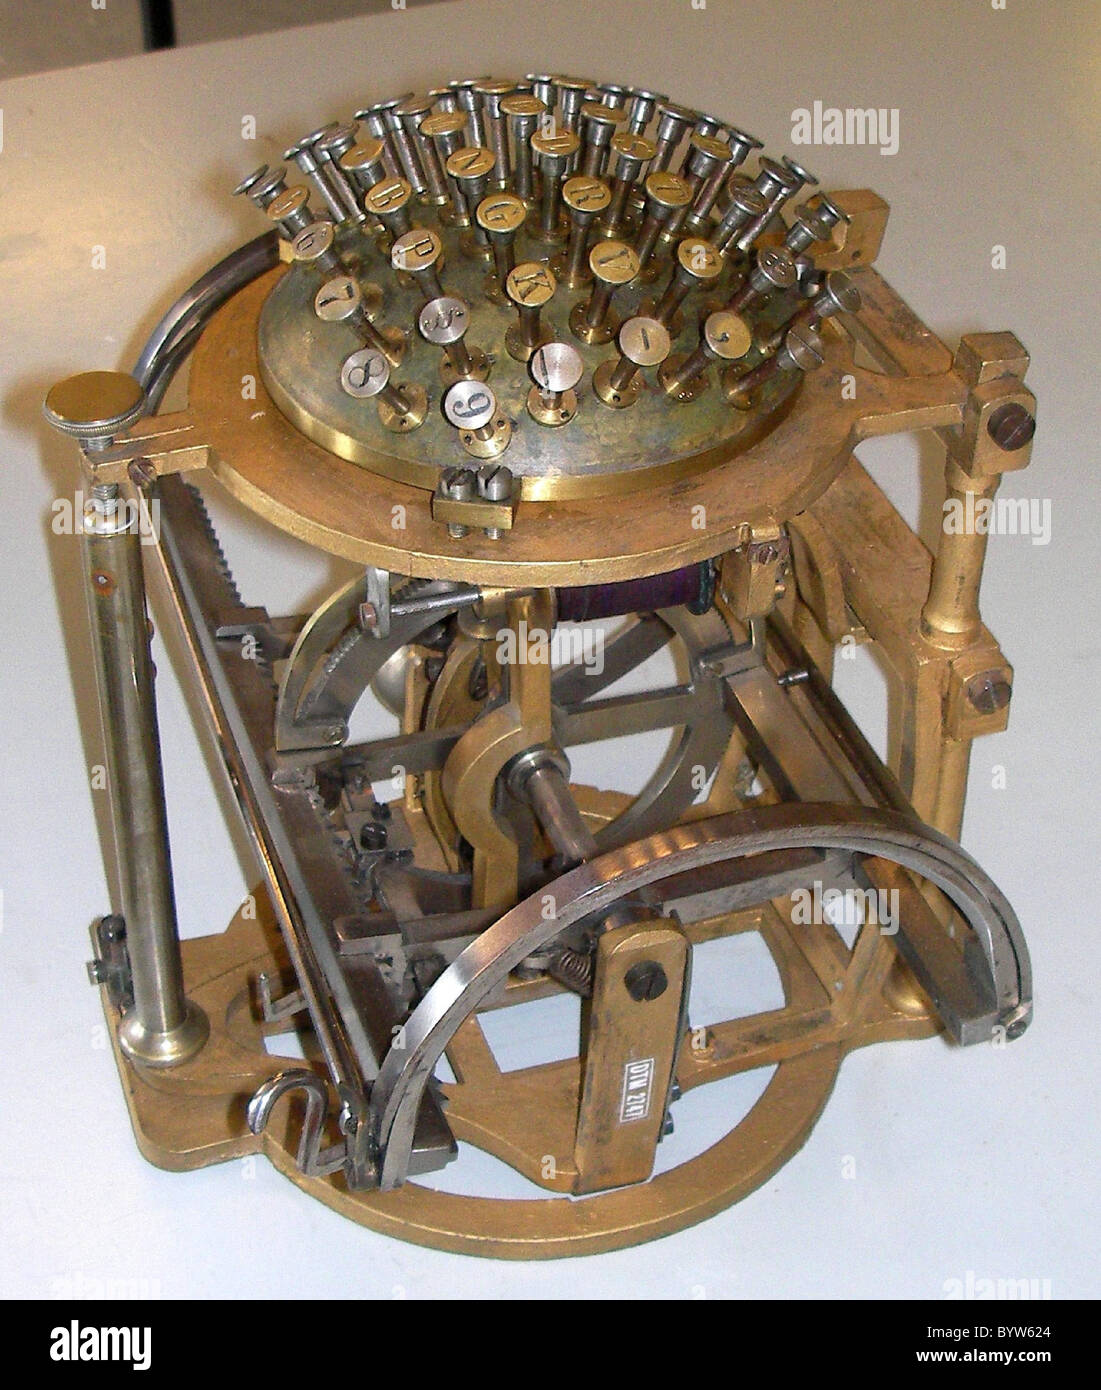 Writing Ball Rasmus Malling-Hansen (1835 - 1890) created this "writing ball",  the world's first commercially produced Stock Photo - Alamy